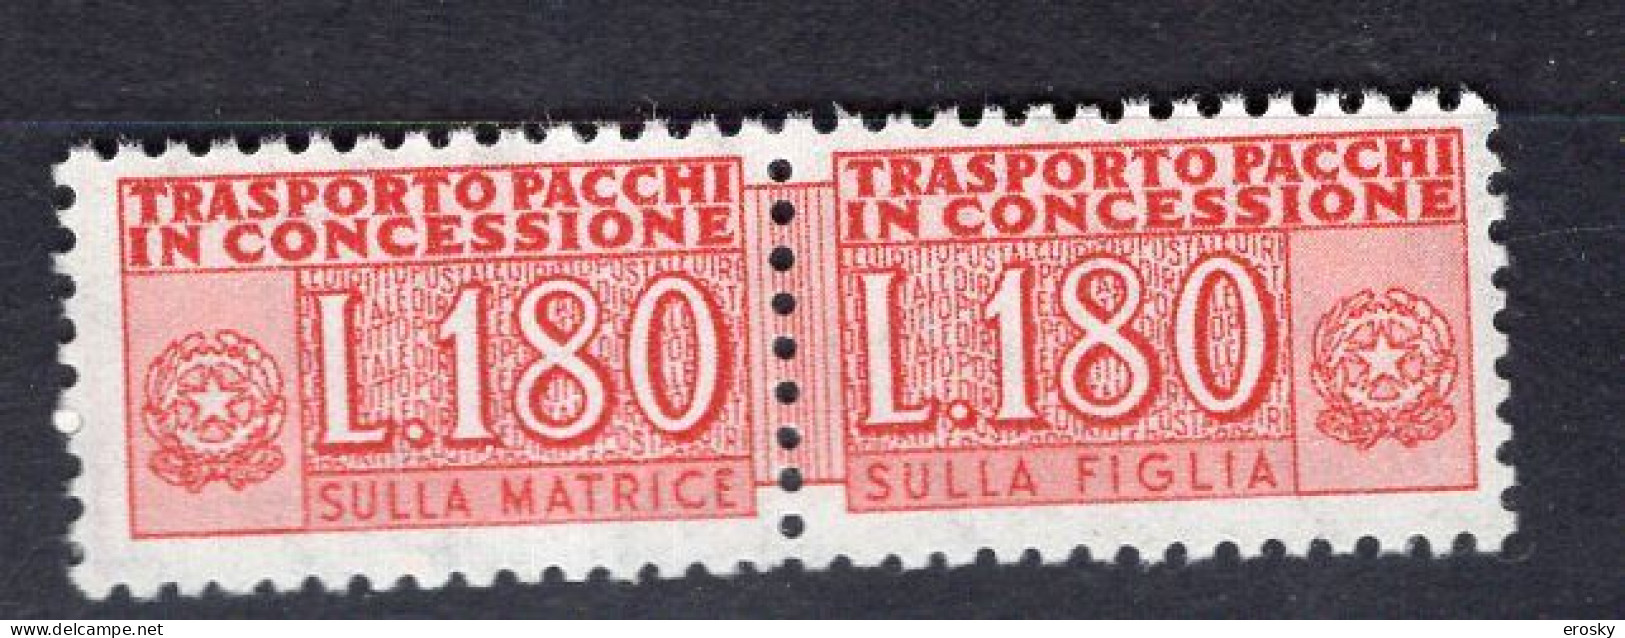 Y6273 - ITALIA PACCHI CONCESSIONE Ss N°17 - ITALIE COLIS Yv N°102 ** - Consigned Parcels